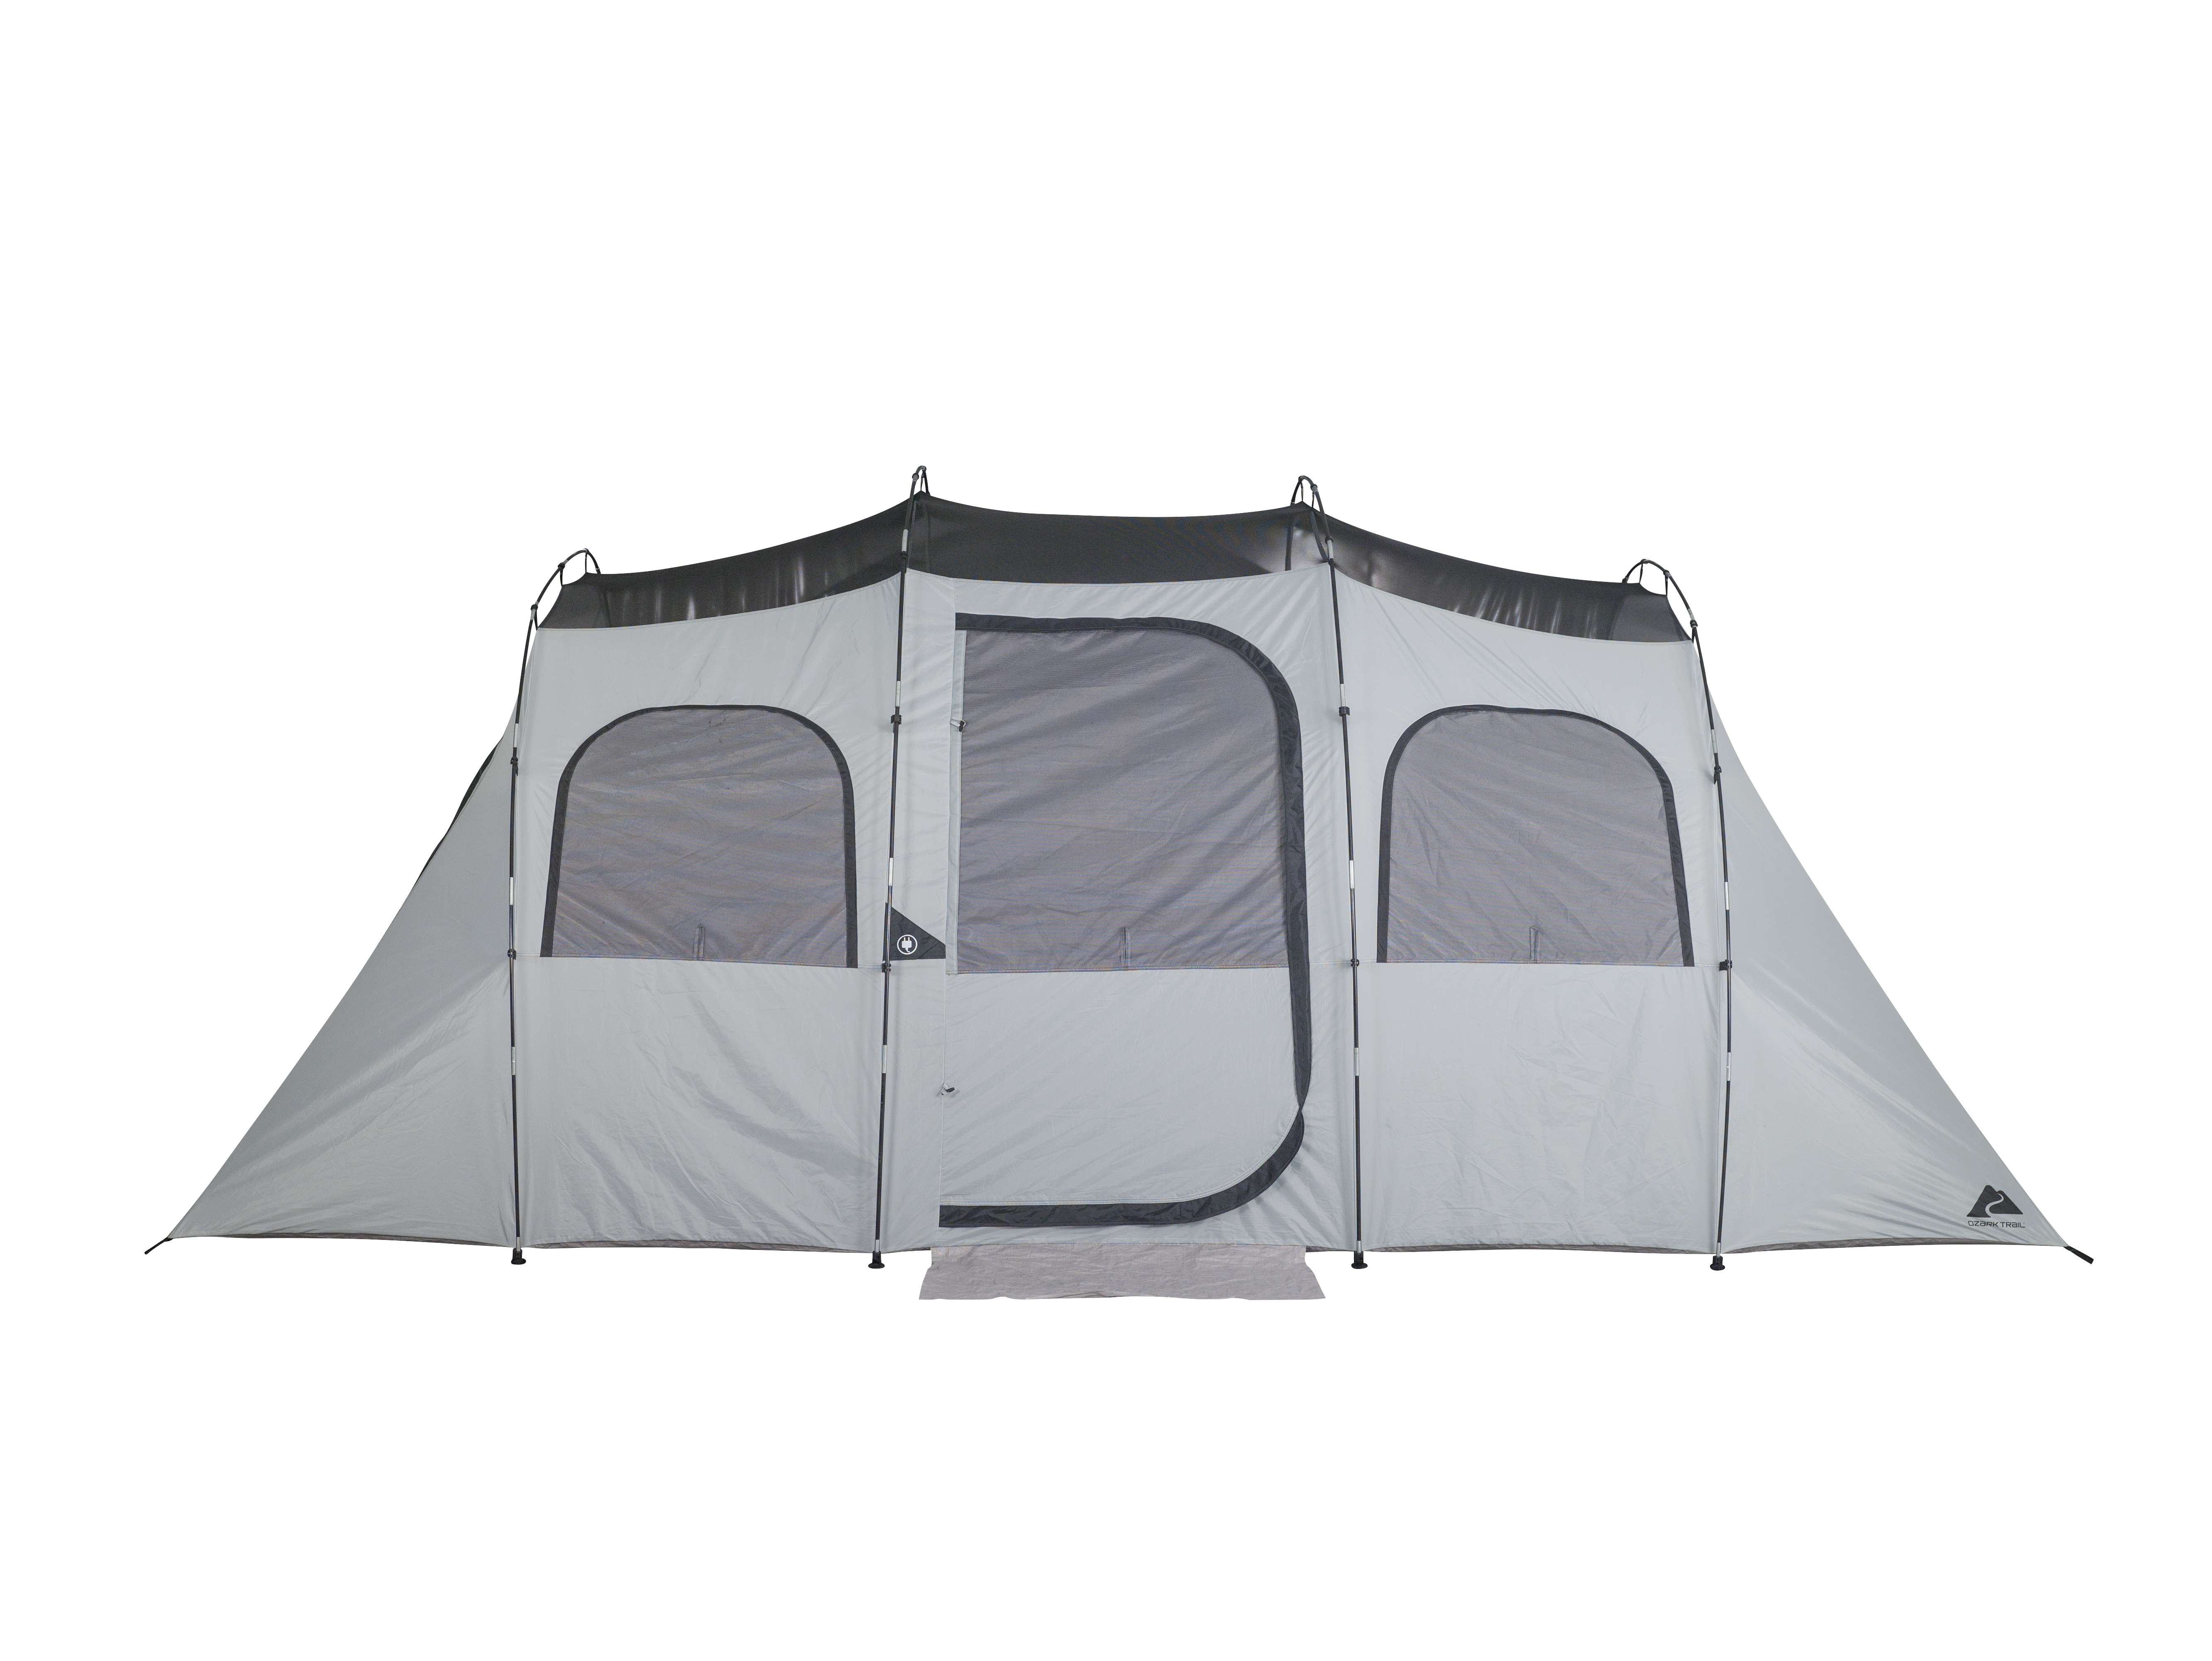 Ozark Trail 8 Person, Clip & Camp Family Tent, 16 ft. x 8 ft. x 78 in., 23.81 lbs. - image 3 of 15